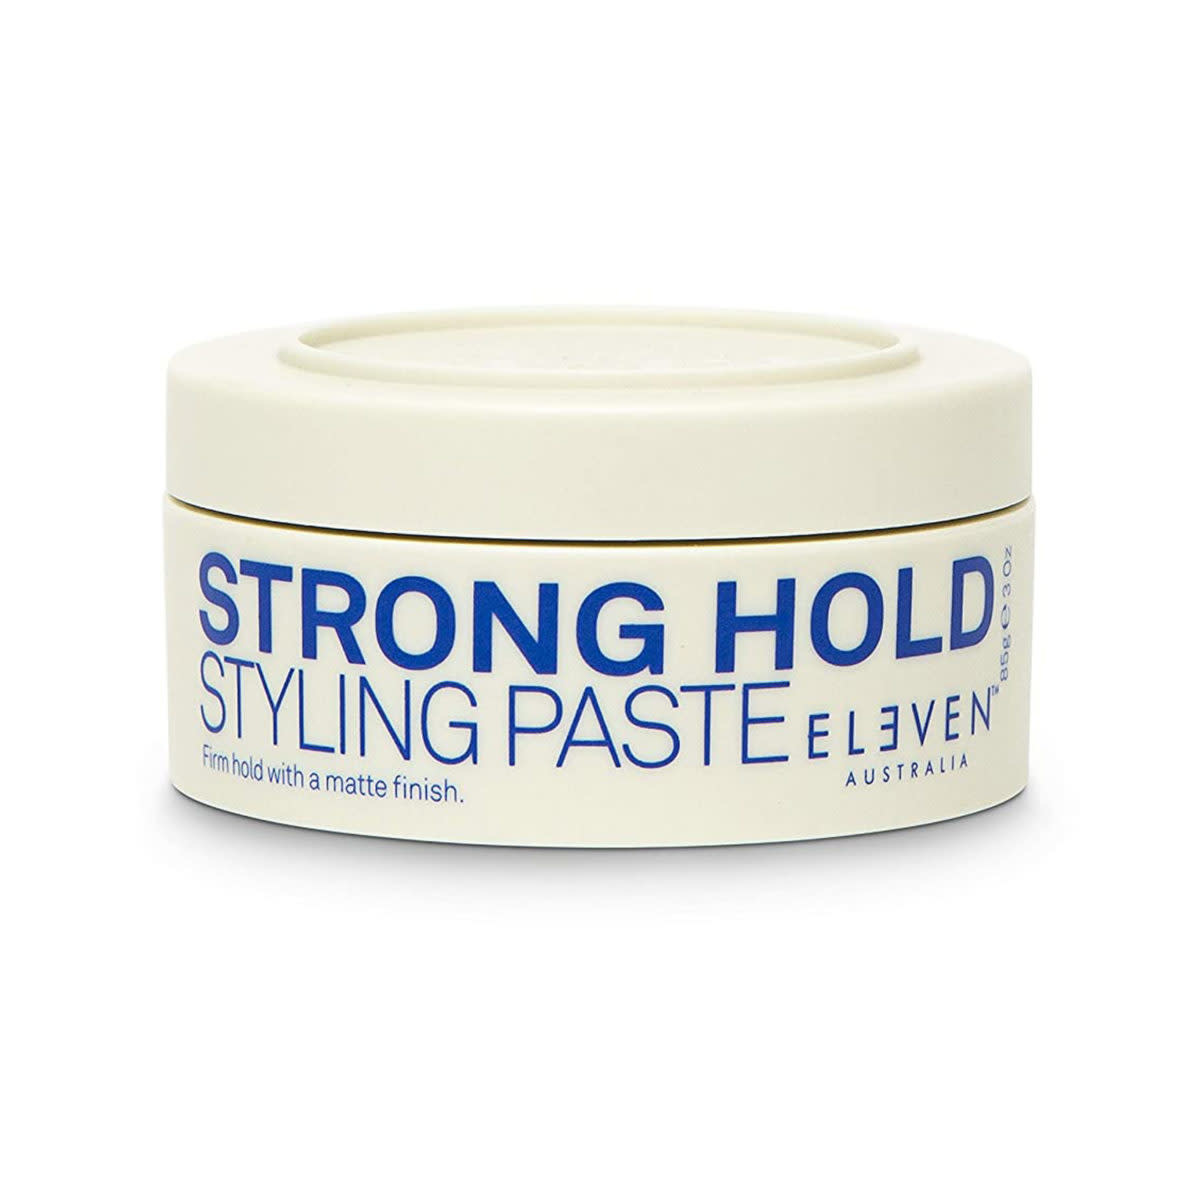 STRONG HOLD Styling Paste 85g (3 oz)